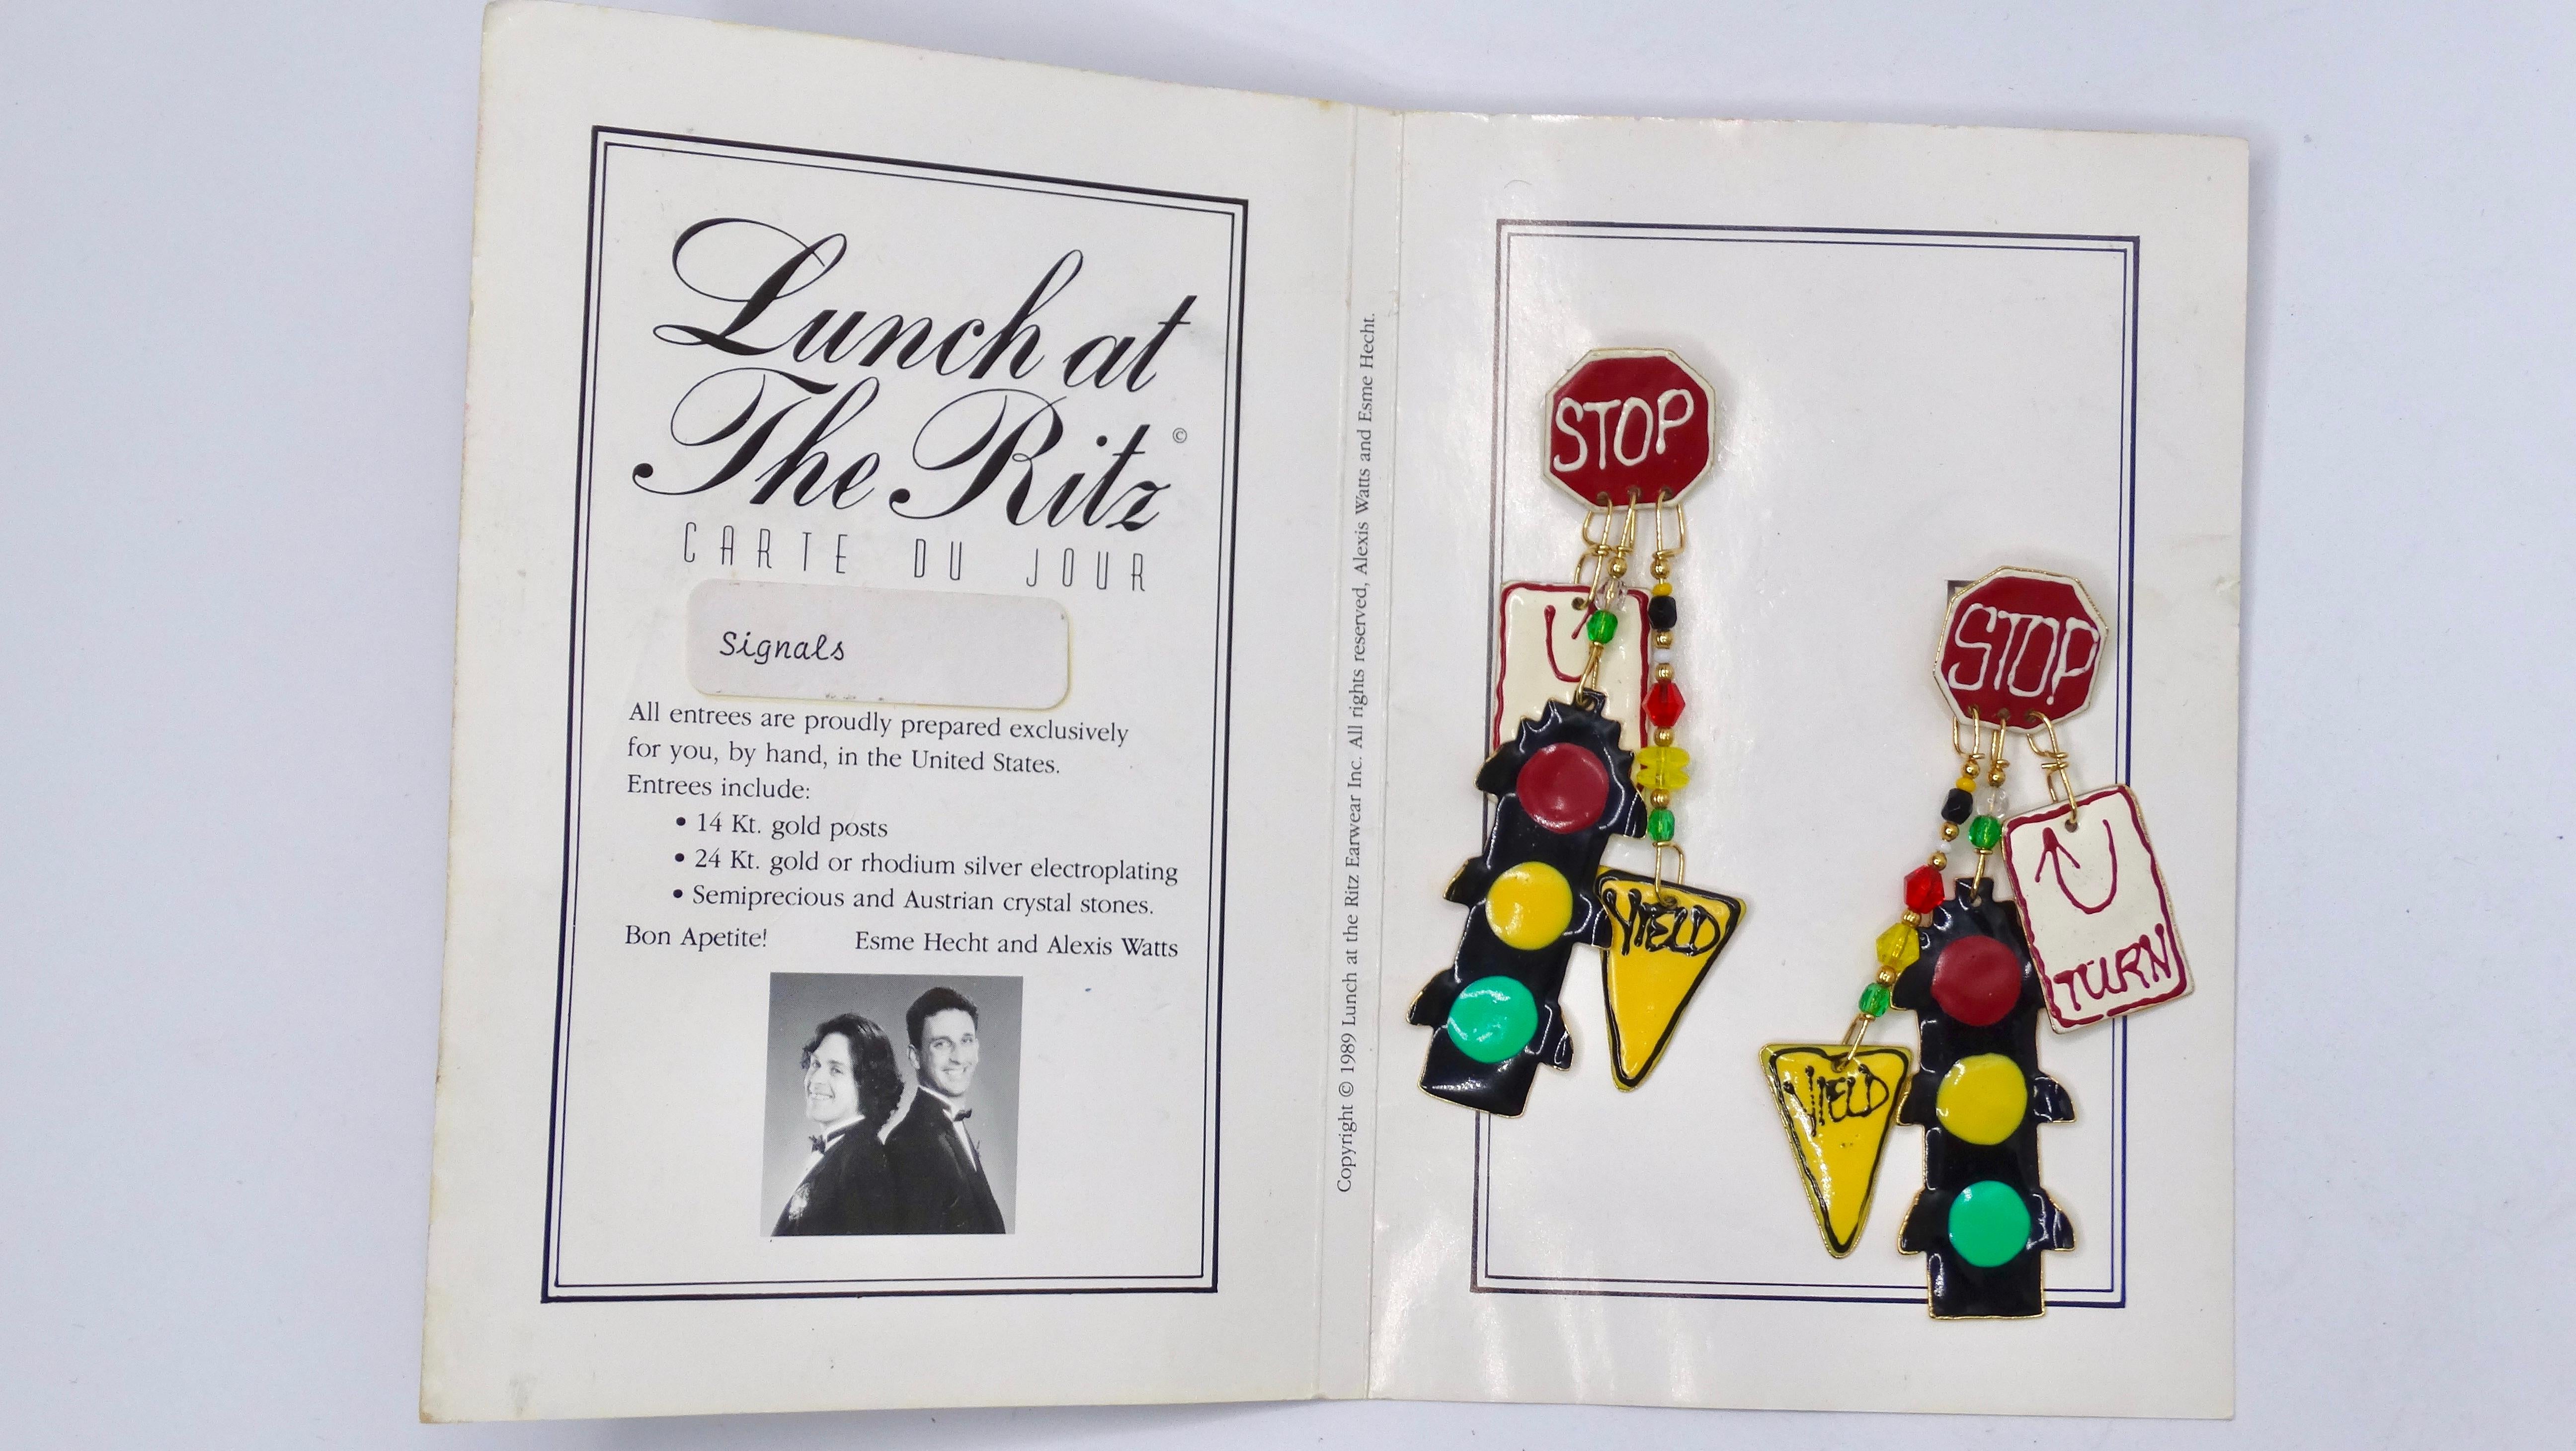 These are the most fun piece of collectible costume jewelry! No one will be able to resist complimenting you on these works of art! Add some youthfulness and fun to your outfit by adding these traffic signal motif earrings to your outfit. These are